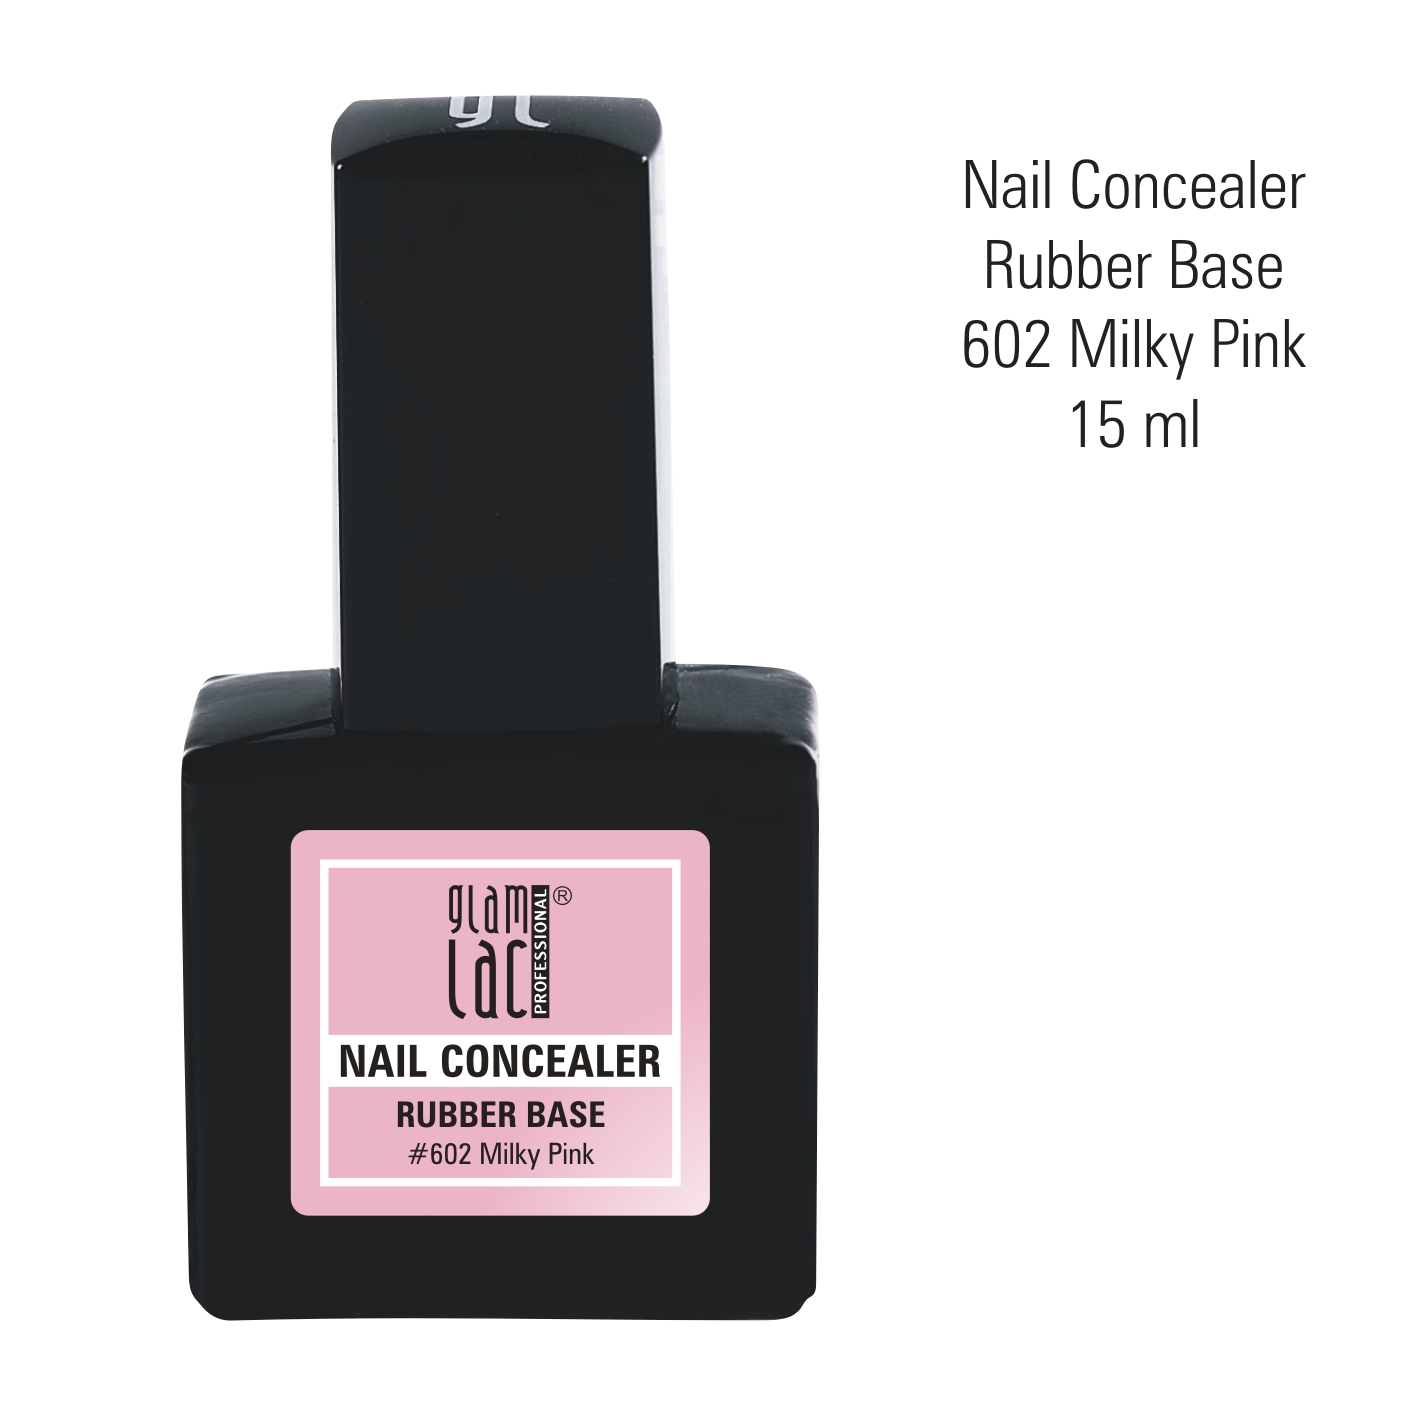 Rubber base "602 Milky Pink", 15 ml